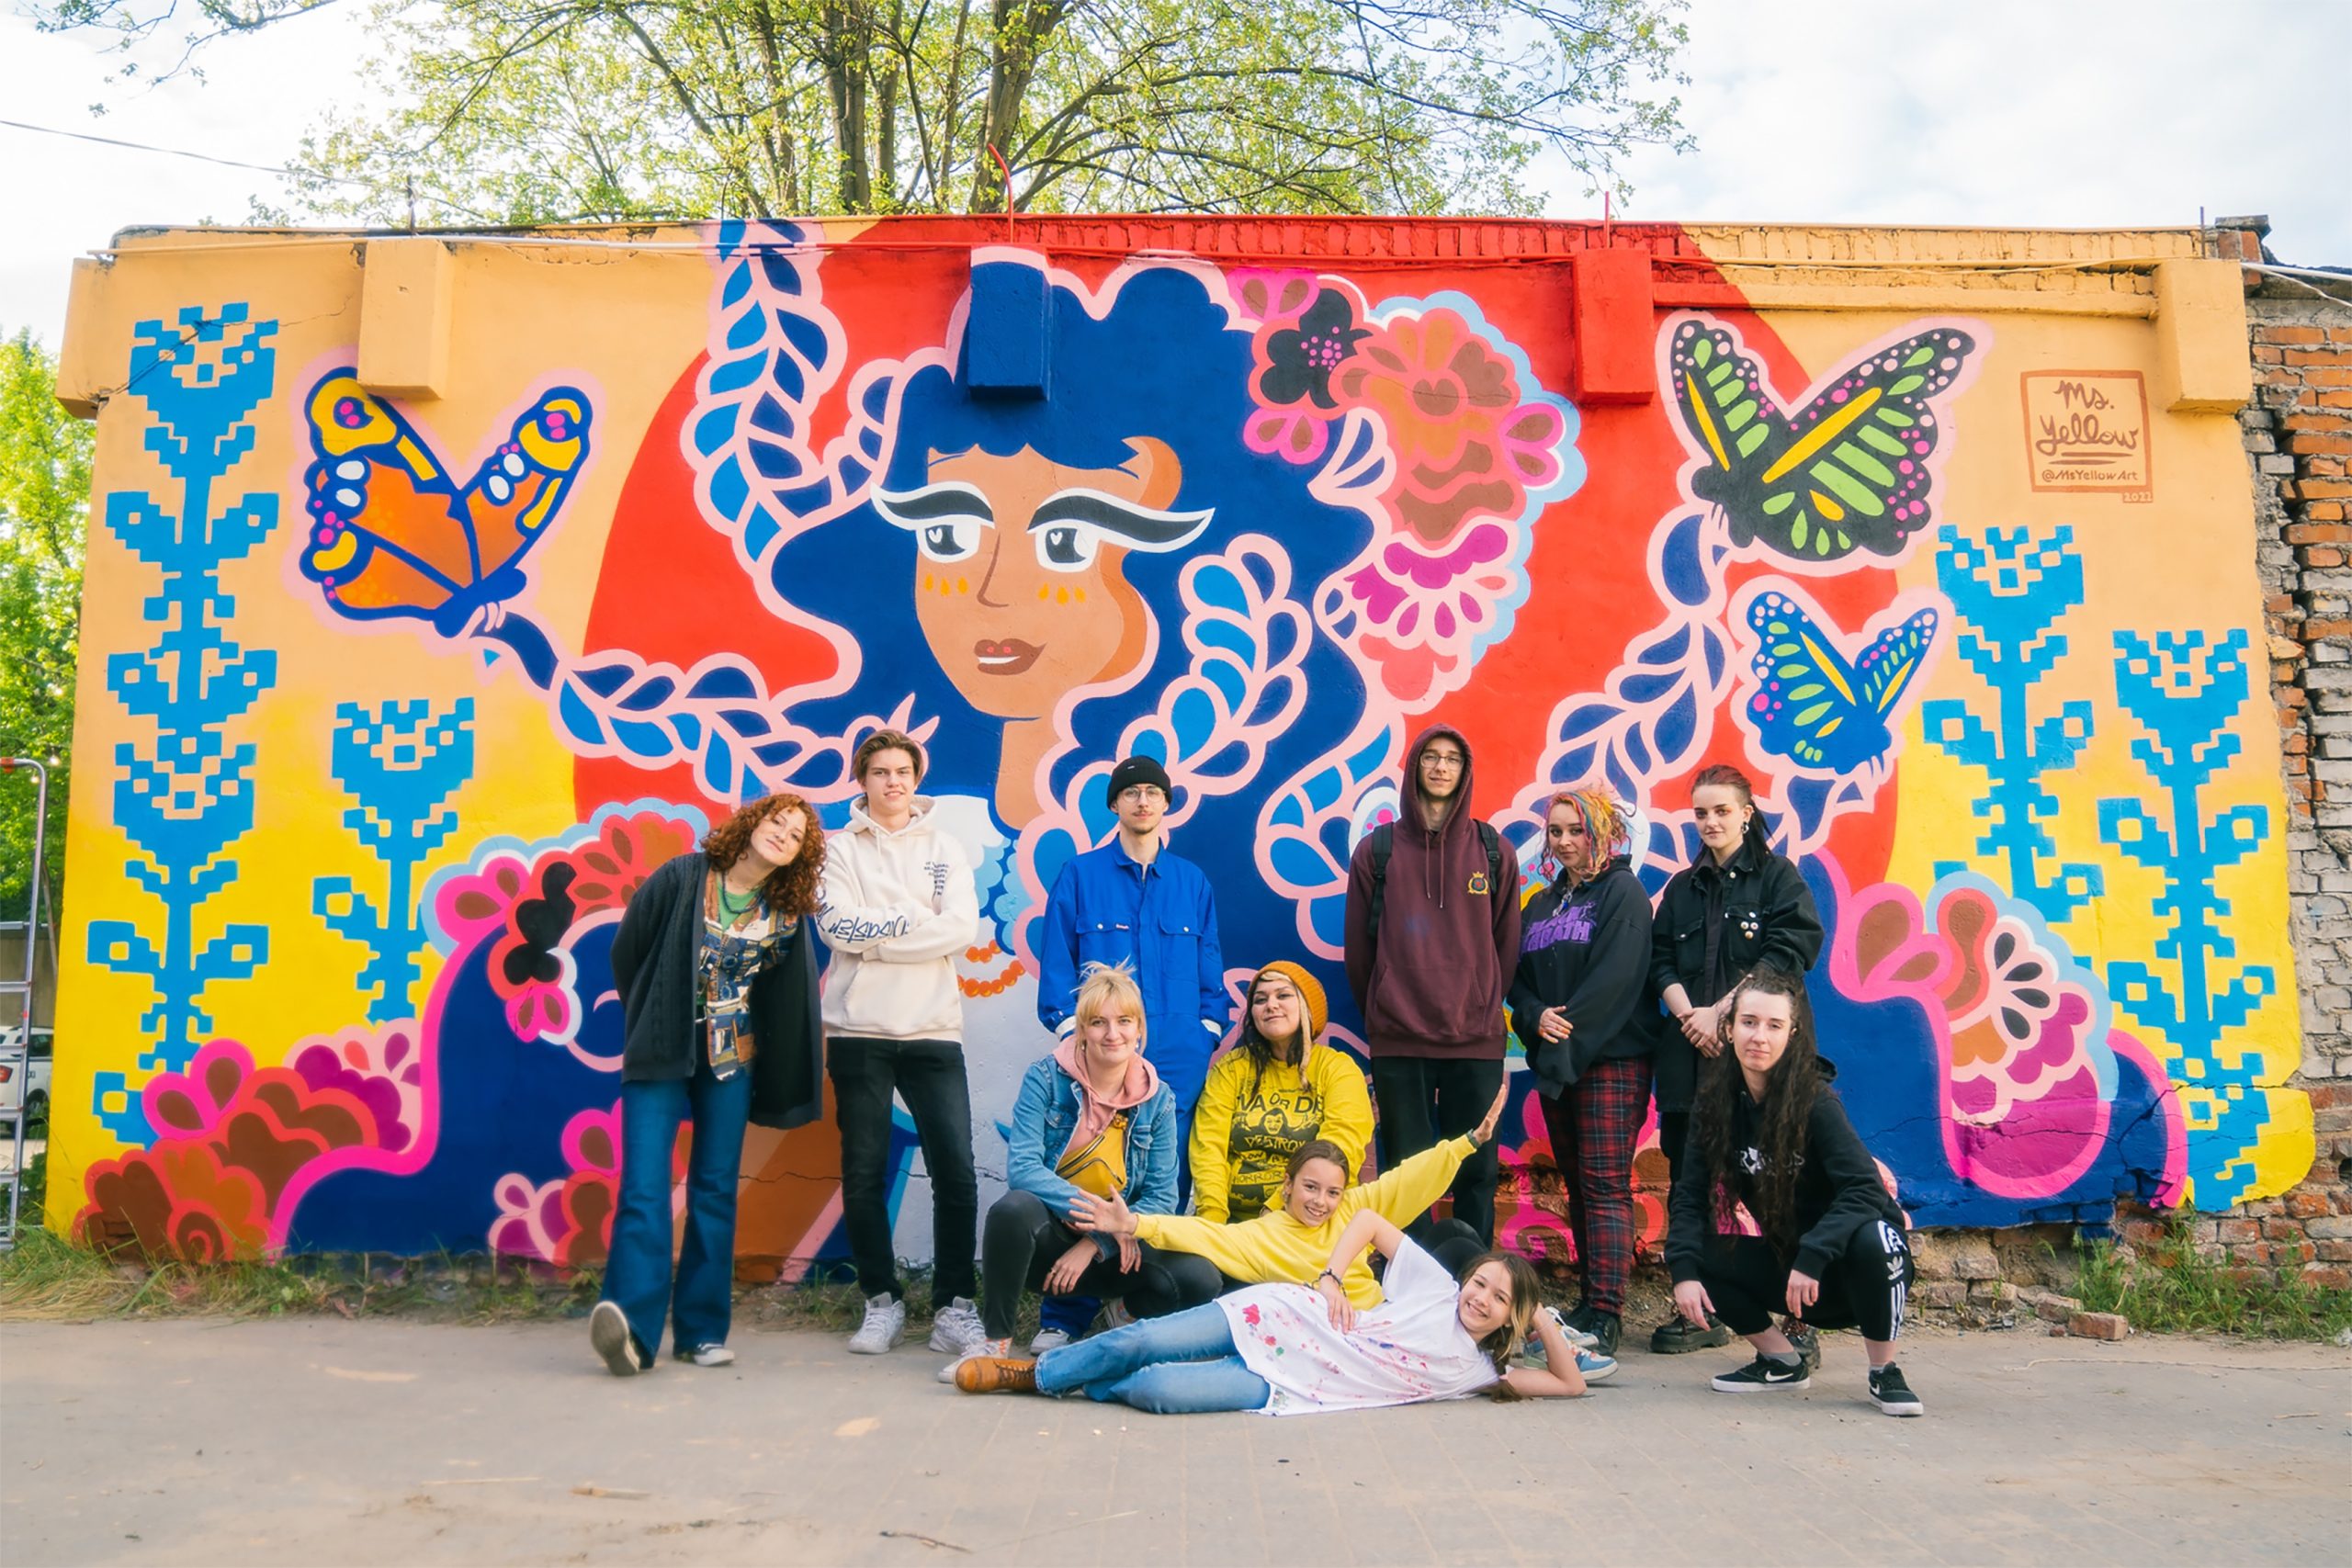 Next Level's Poland cohort poses in front of a mural in Lodz, Poland. The group met with Ukrainian refugees to share insight into how Hip Hop can play a role in conflict resolution.